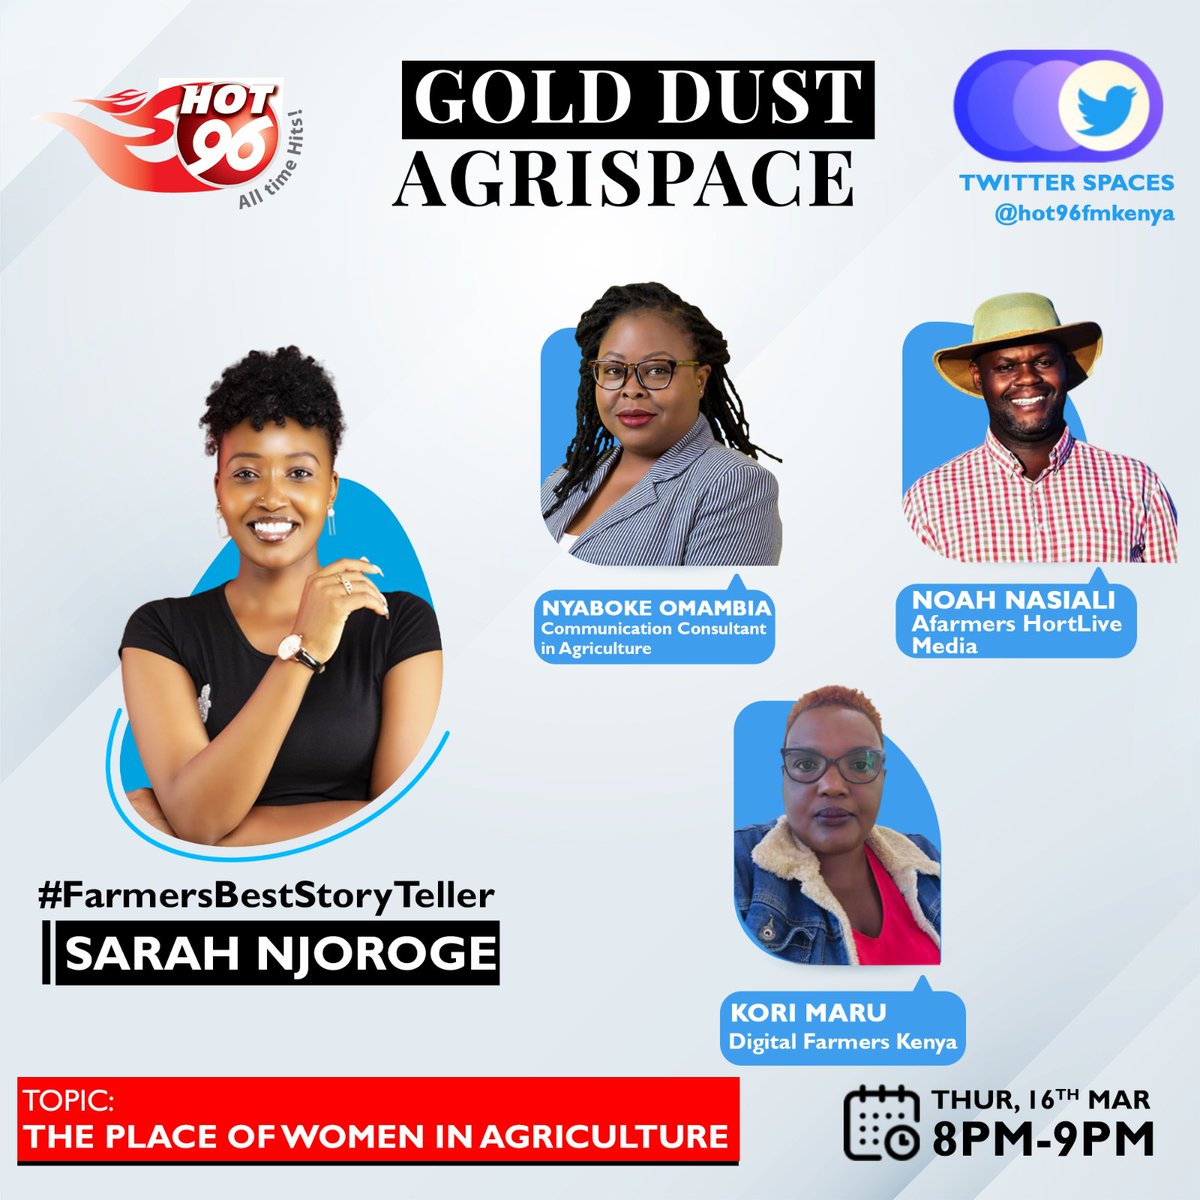 Tonight on @Hot_96Kenya Gold Dust AgriSpace, we get to understand The Place of Women In Agriculture and answer the Question; What is there for Women in Agriculture?

Join in from 8pm to 9pm w/ #FarmersBestStoryTeller @SarahWNjoroge 

#GoldDustAgriSpace